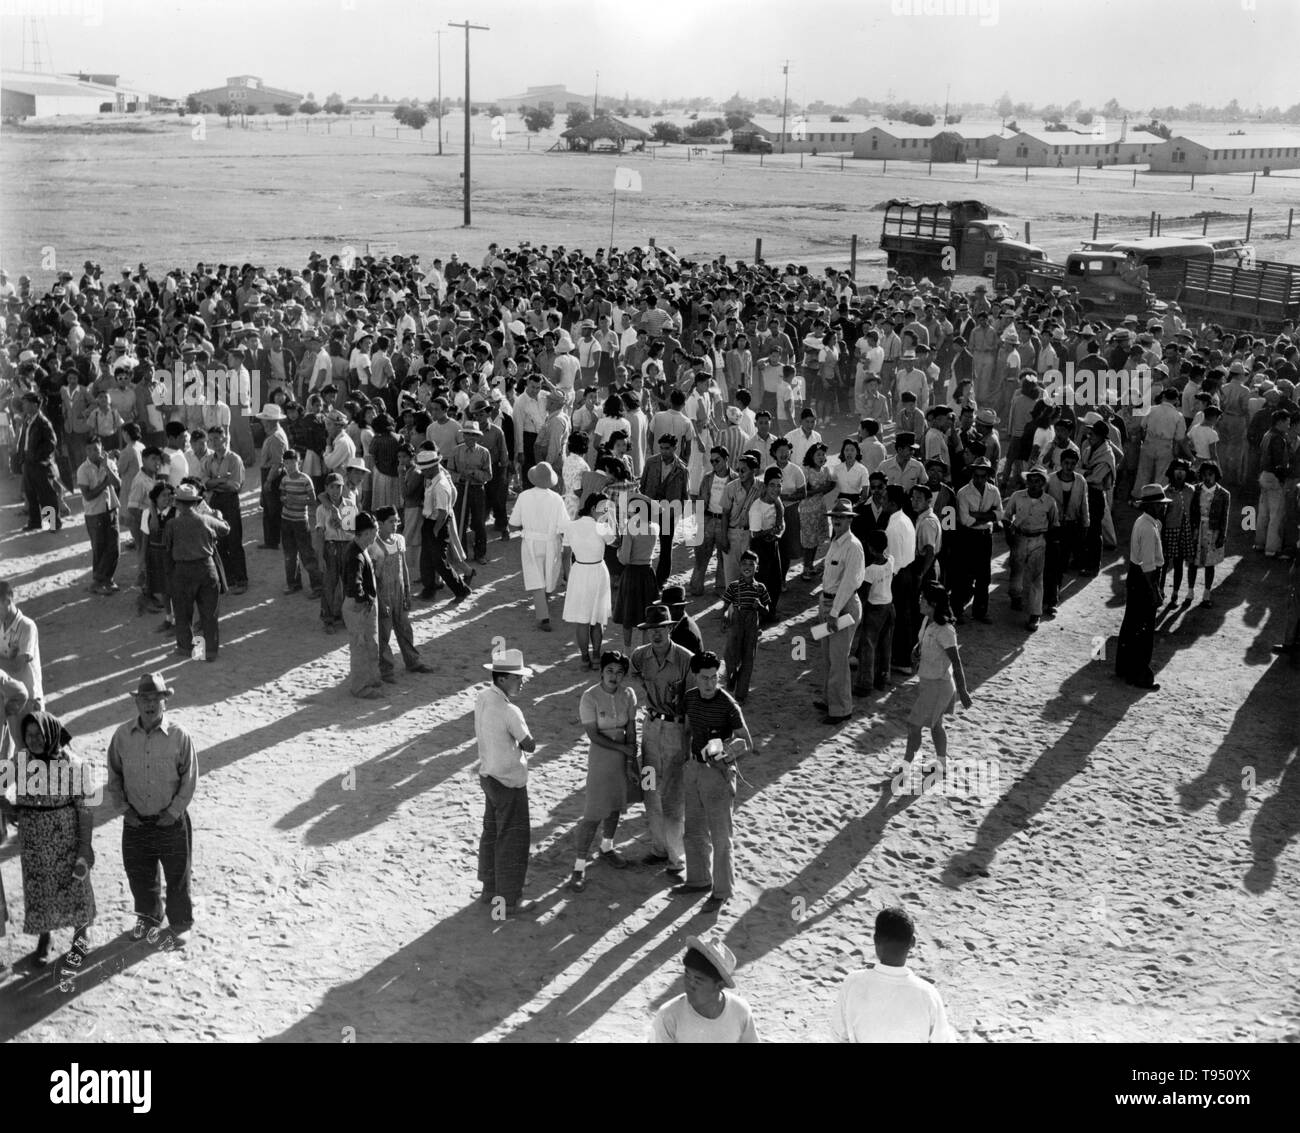 Japanese internment camp wwii Black and White Stock Photos & Images - Alamy